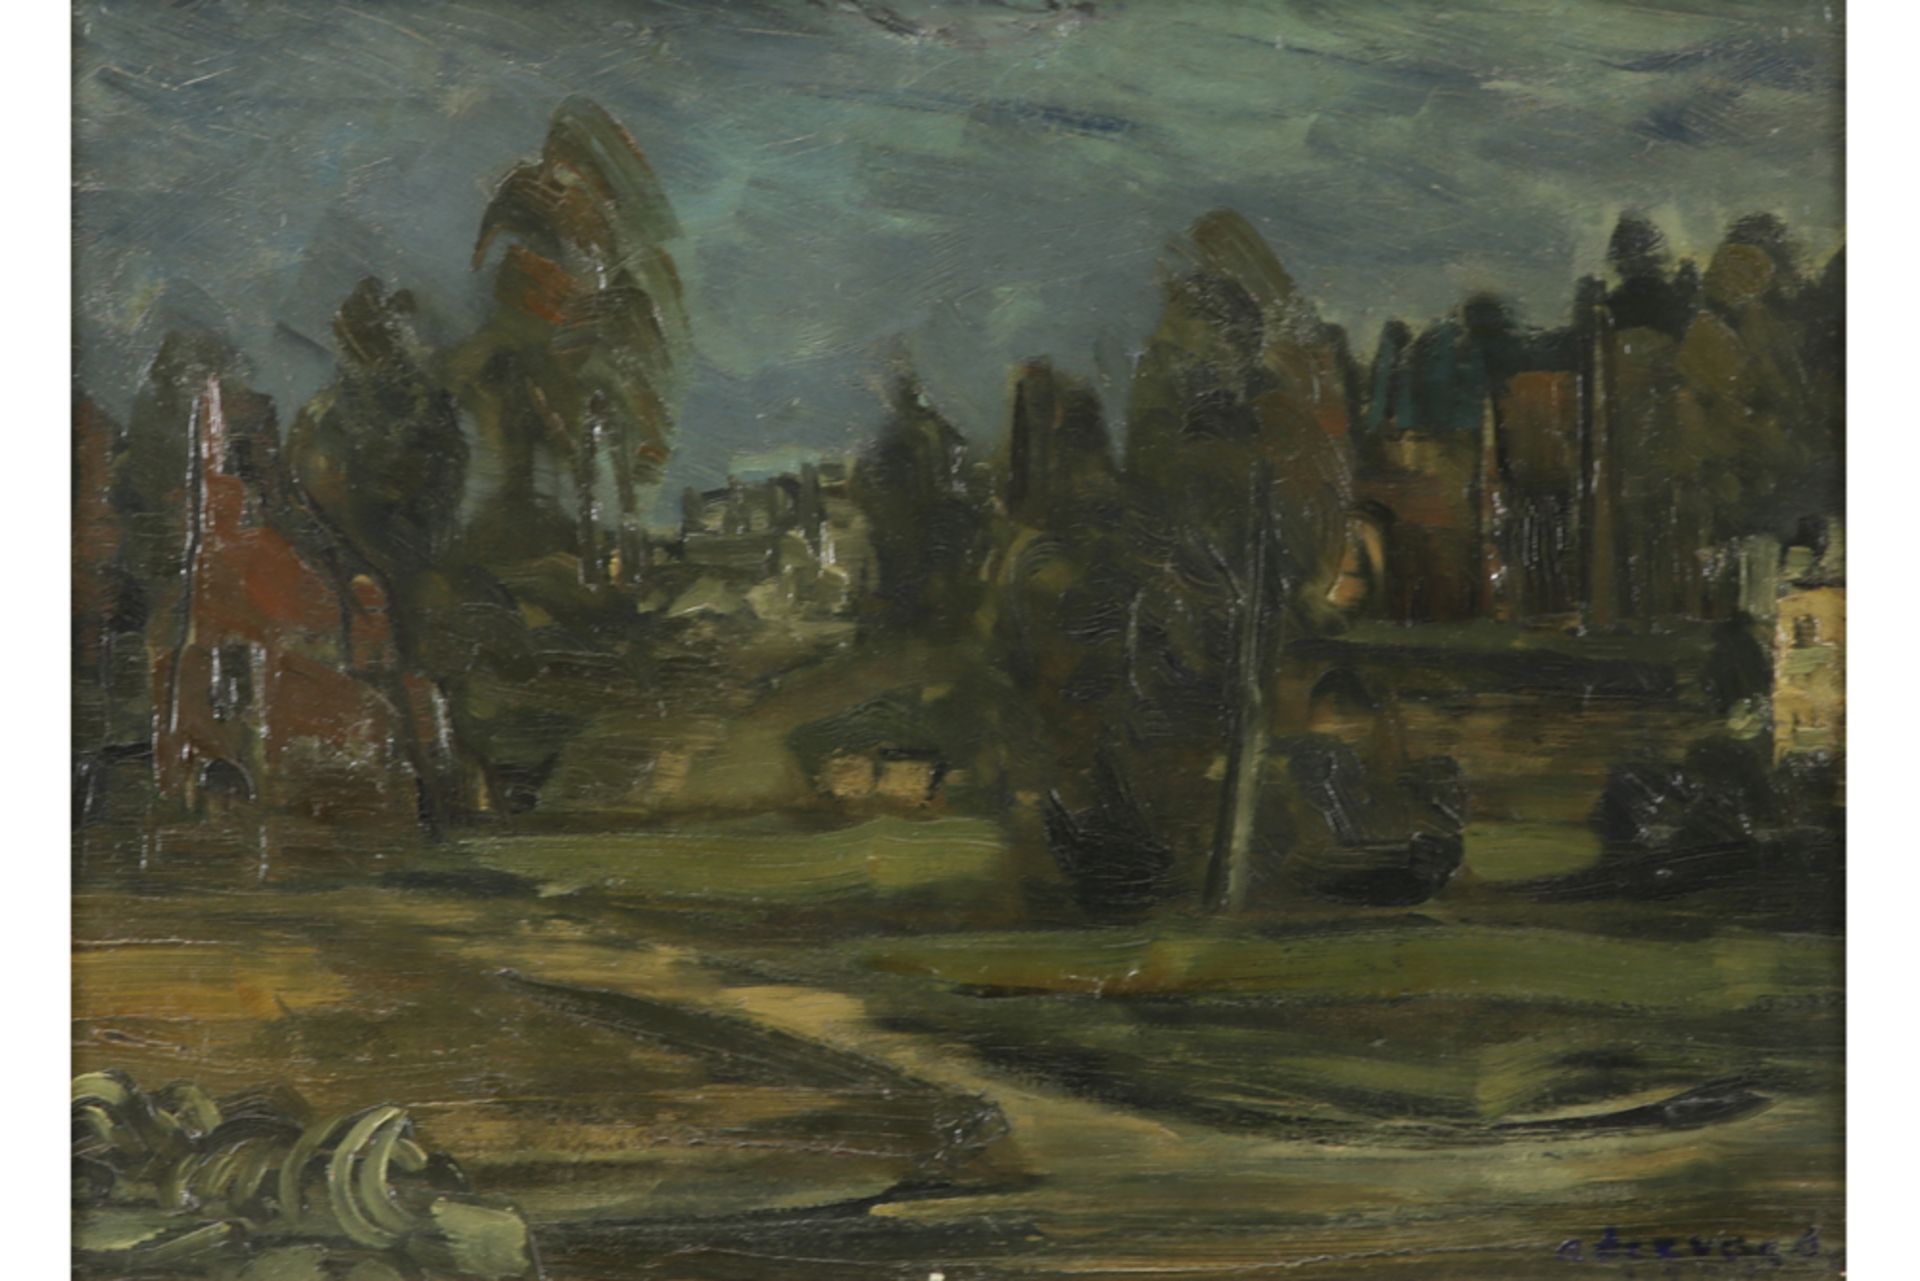 20th Cent. Belgian "Latem School" oil on canvas - signed Albert Servaes and dated 1929/39 (?) ||